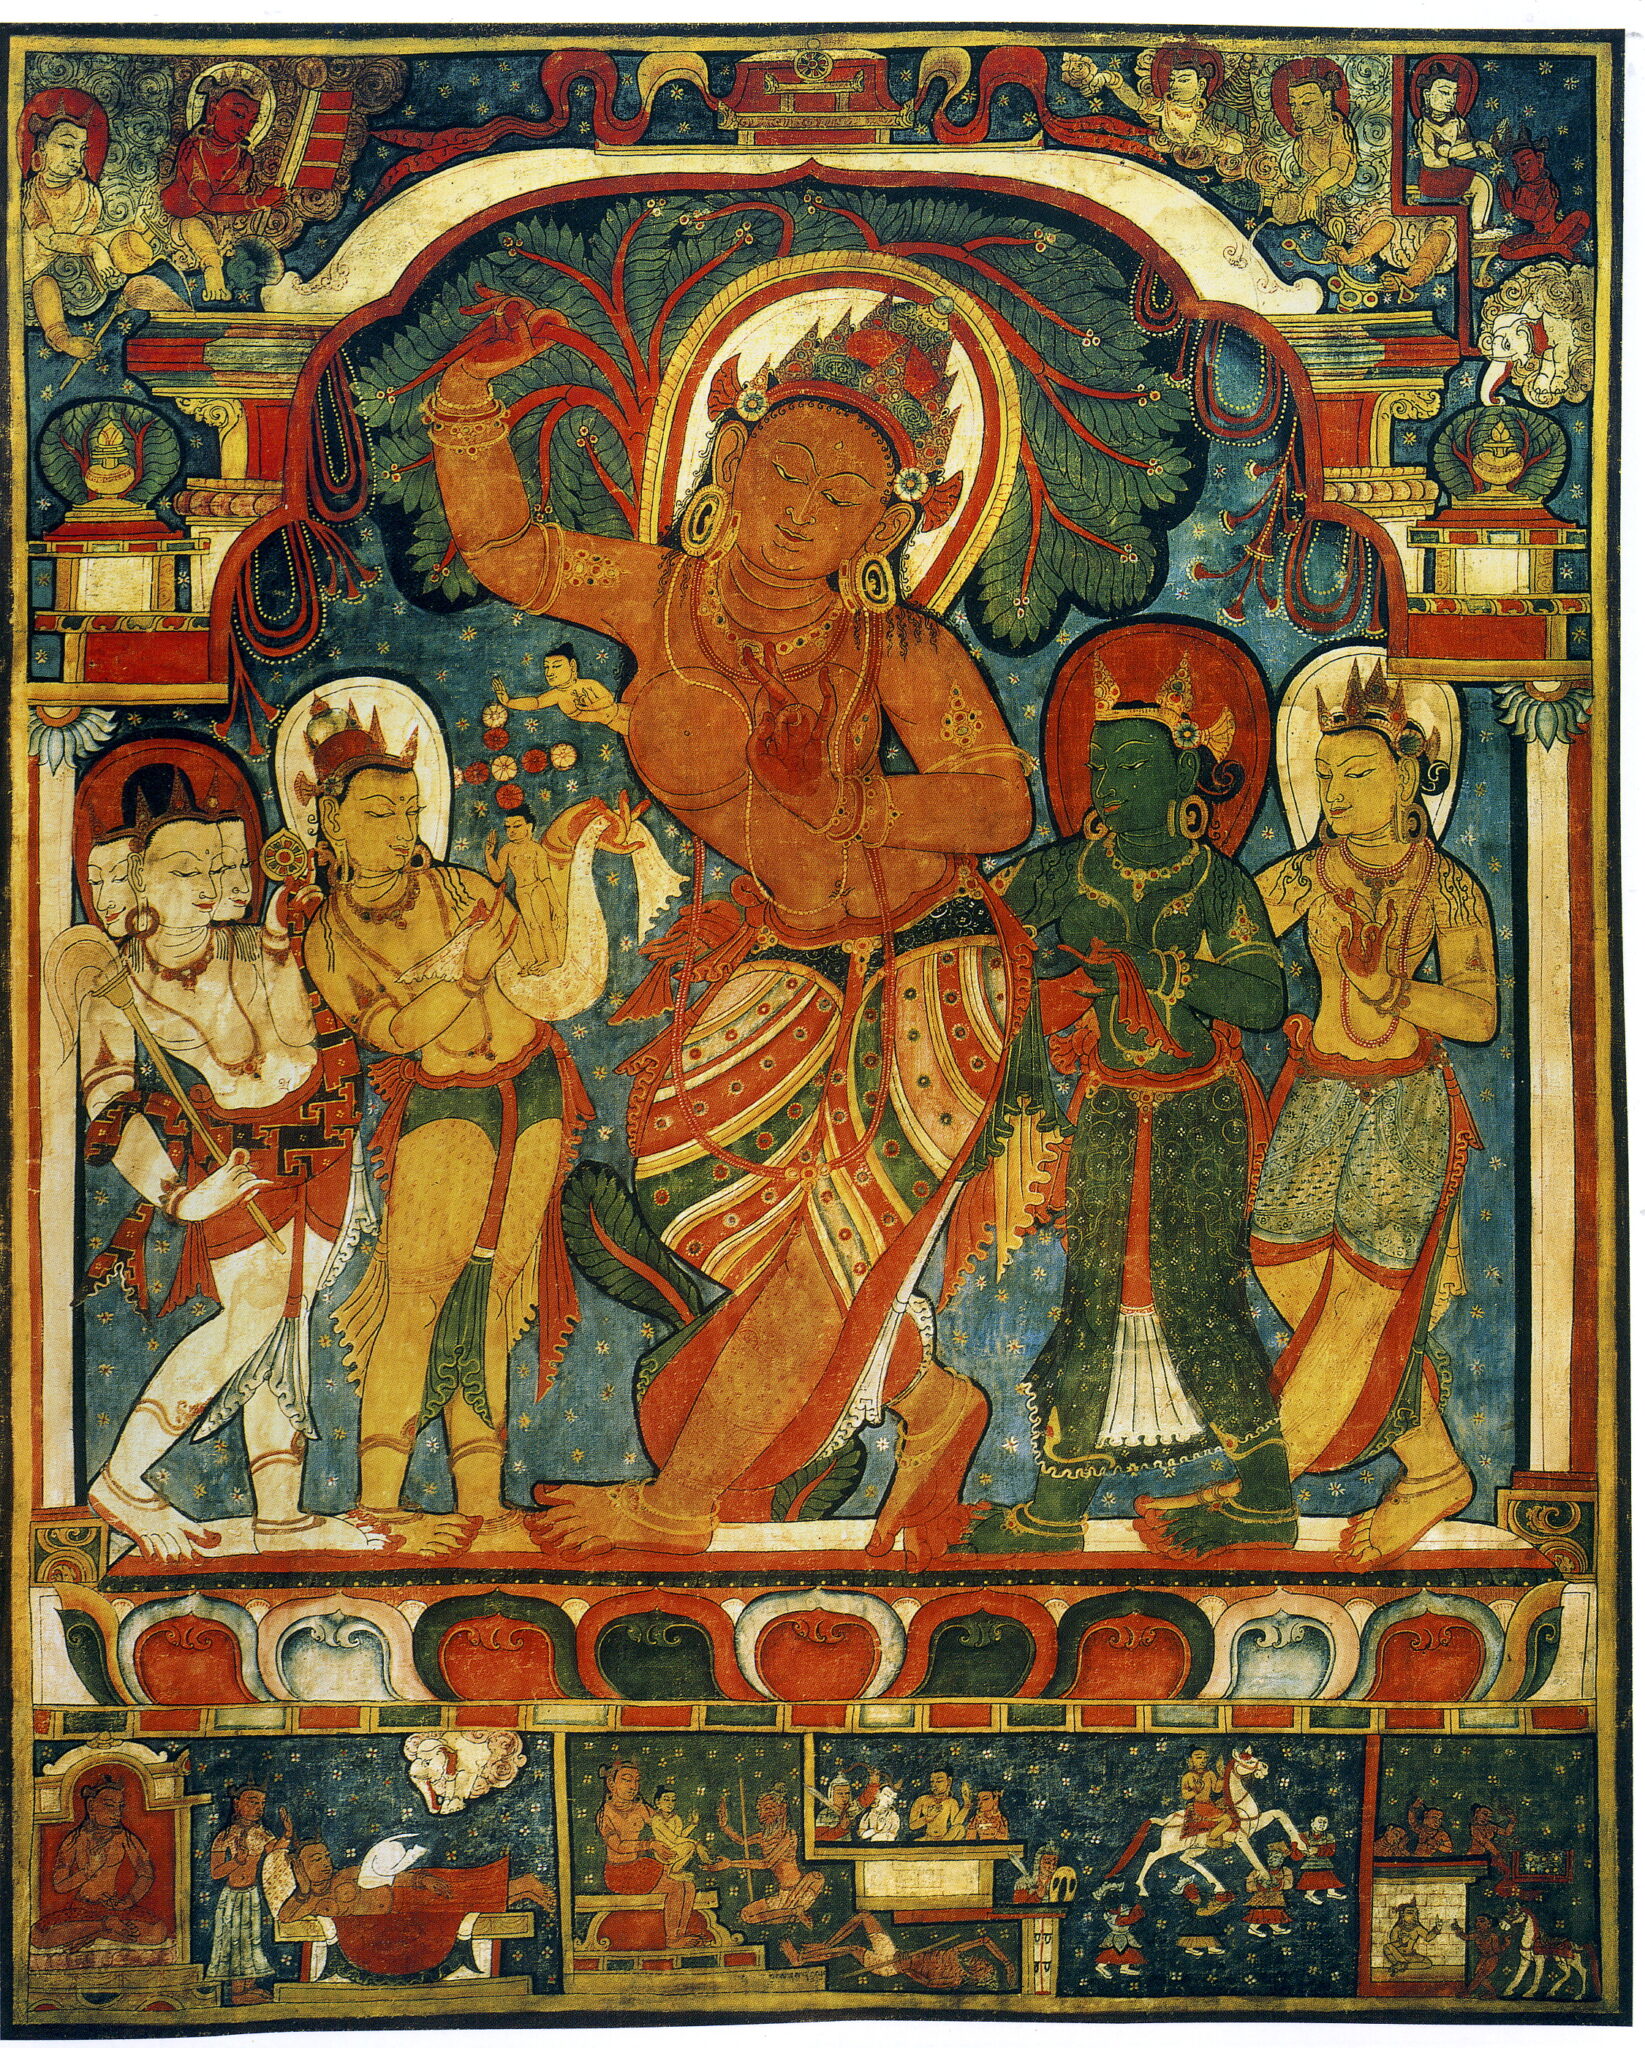 Richly colored deities in garden setting surrounded by various figures and scenes in miniature